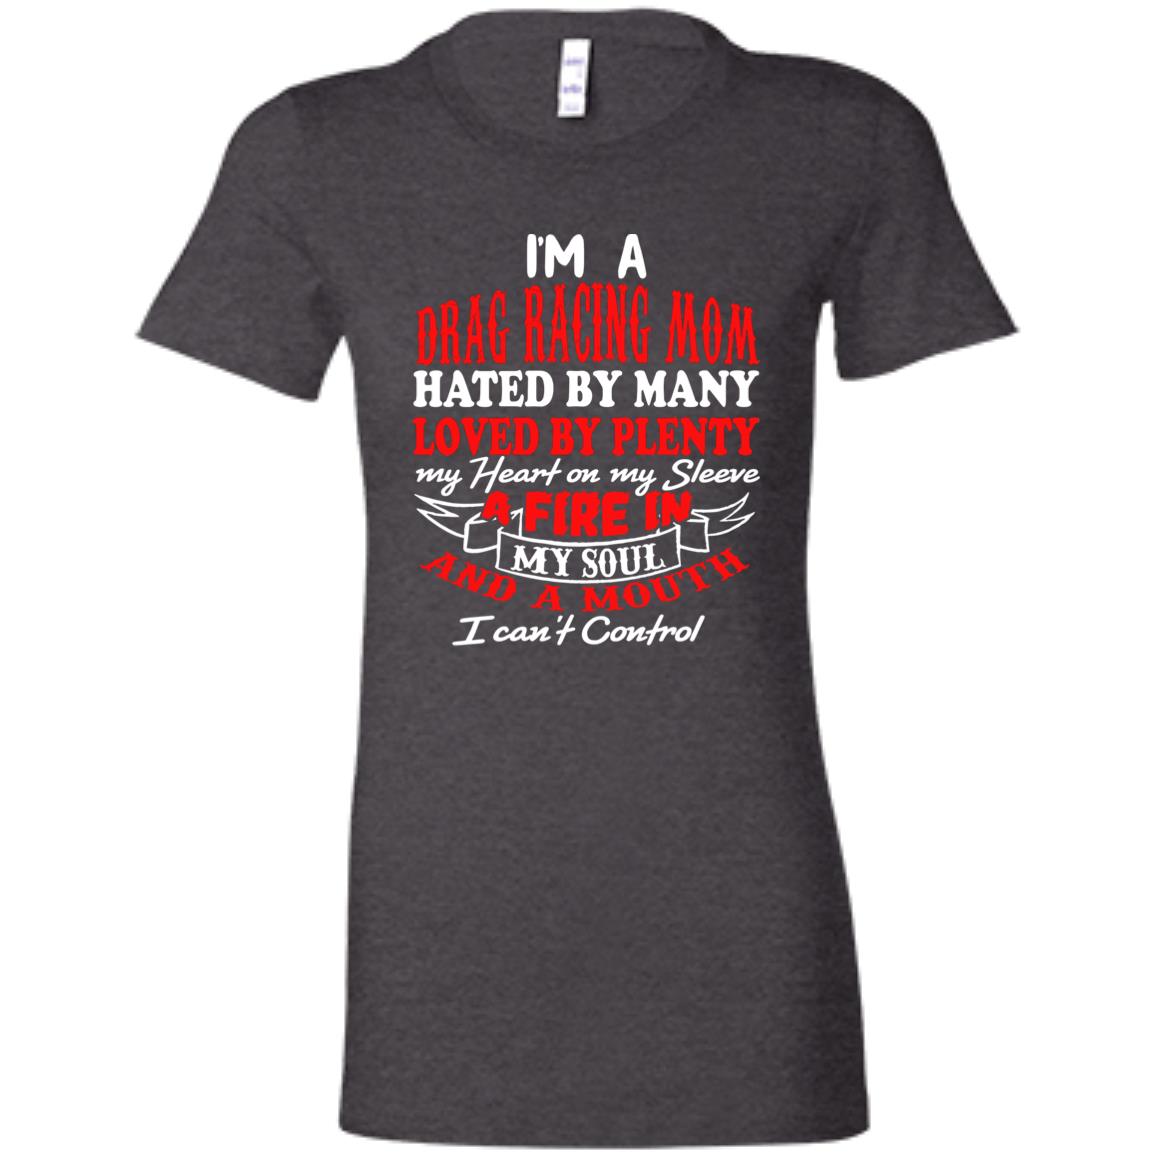 I'm A Drag Racing Mom Hated By Many Loved By Plenty Ladies' Favorite T-Shirt